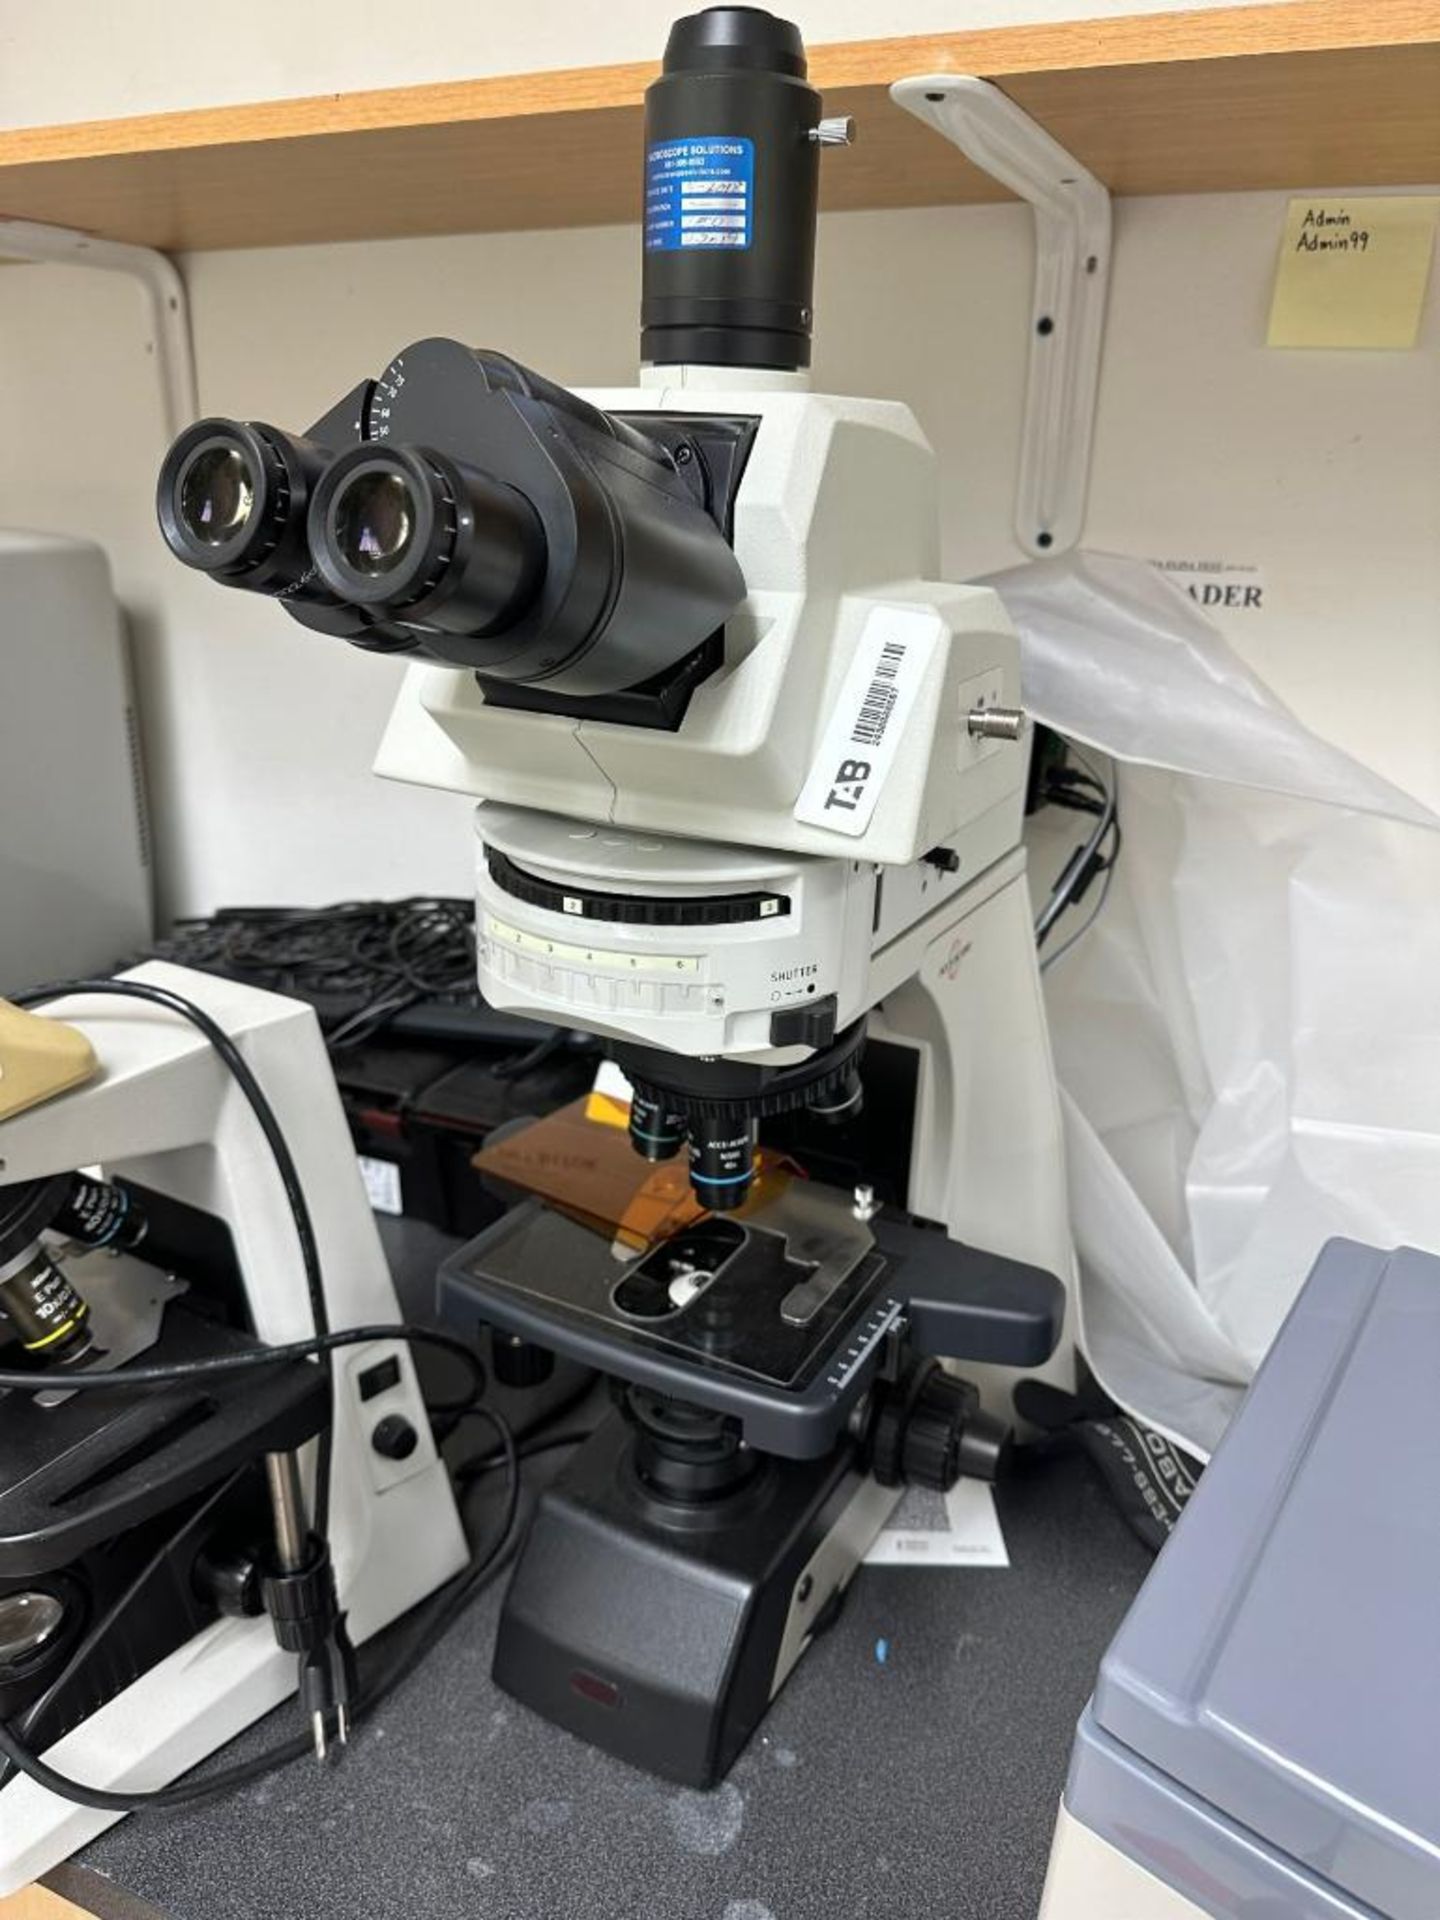 ACCU-SCOPE LAB MICROSCOPE WITH 5 OBJECTIVES